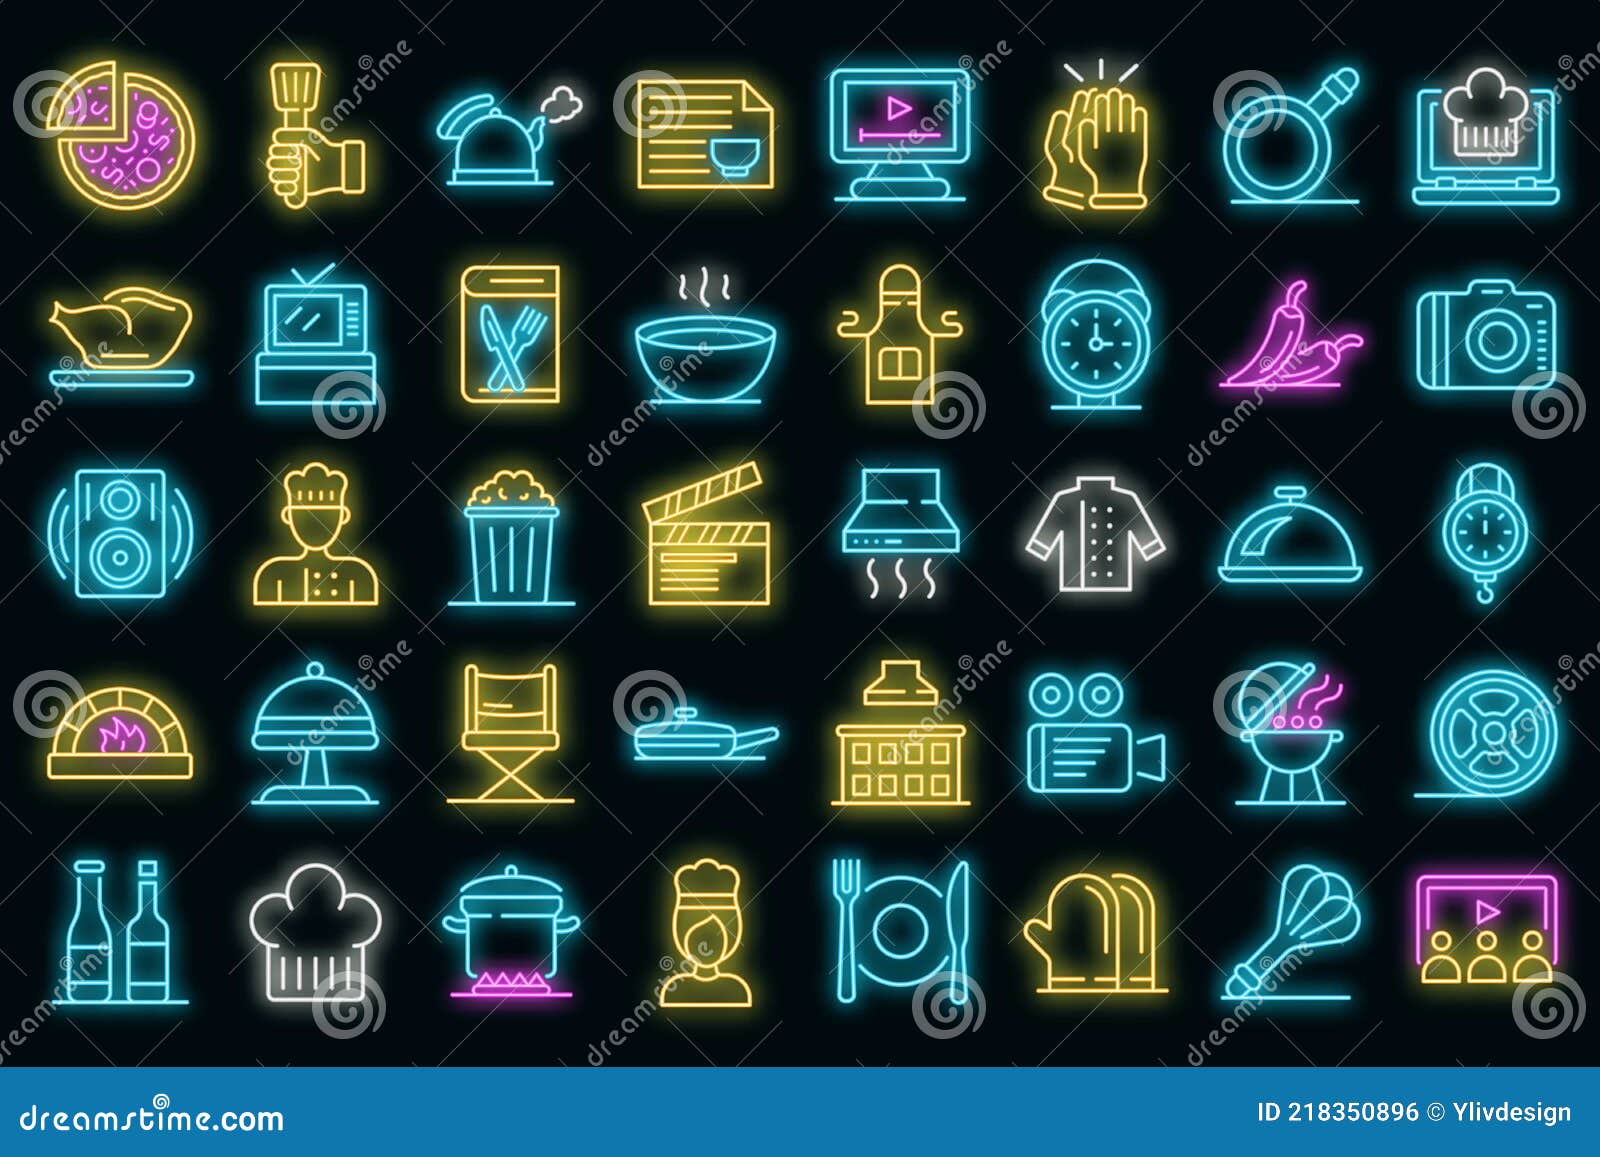 Cooking Show Icons Set Vector Neon Stock Vector - Illustration of ...